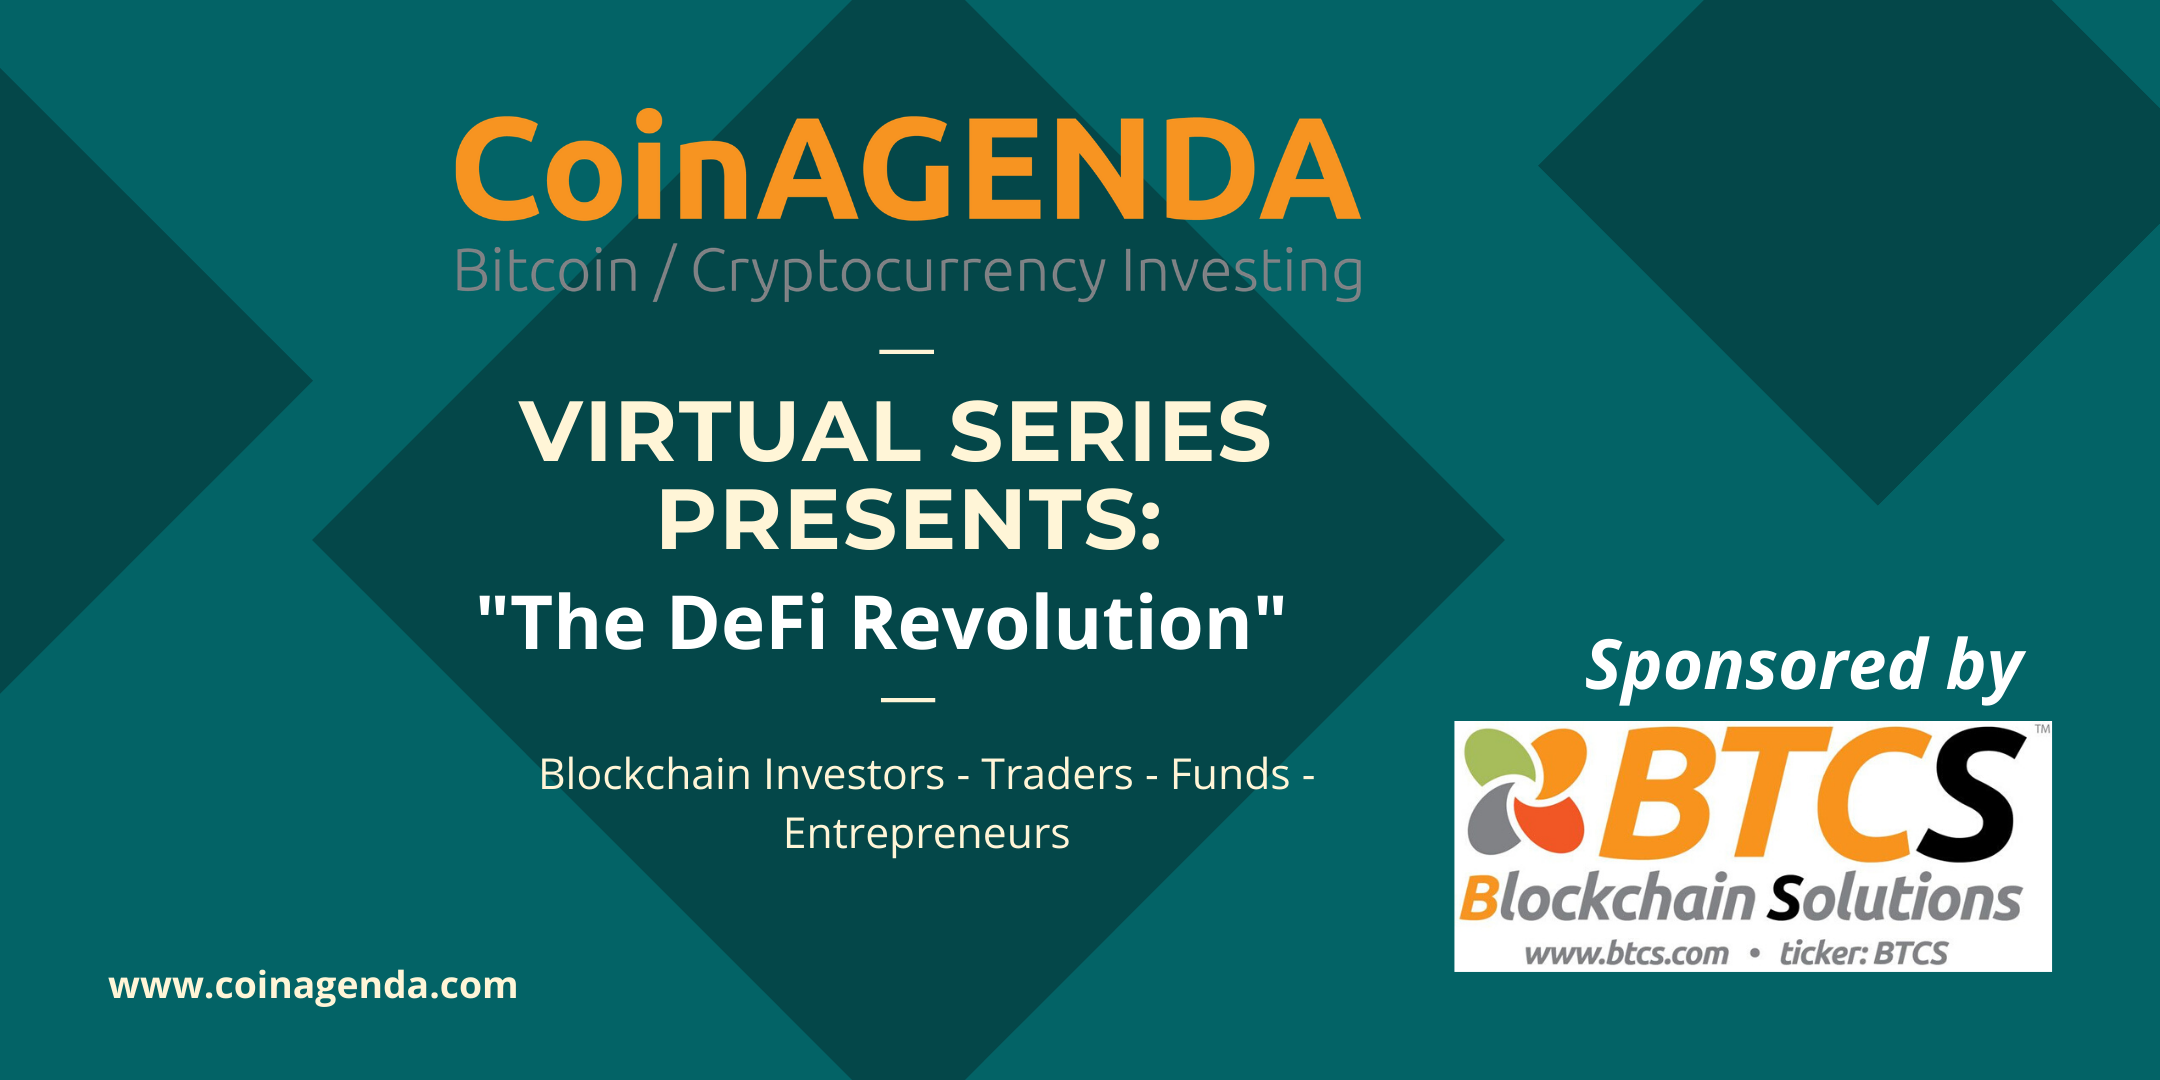 CoinAgenda Virtual Event “The DeFi Revolution” to Feature Fireside Chat with DeFi Expert Shawn Owen, Founder & CEO of Equa